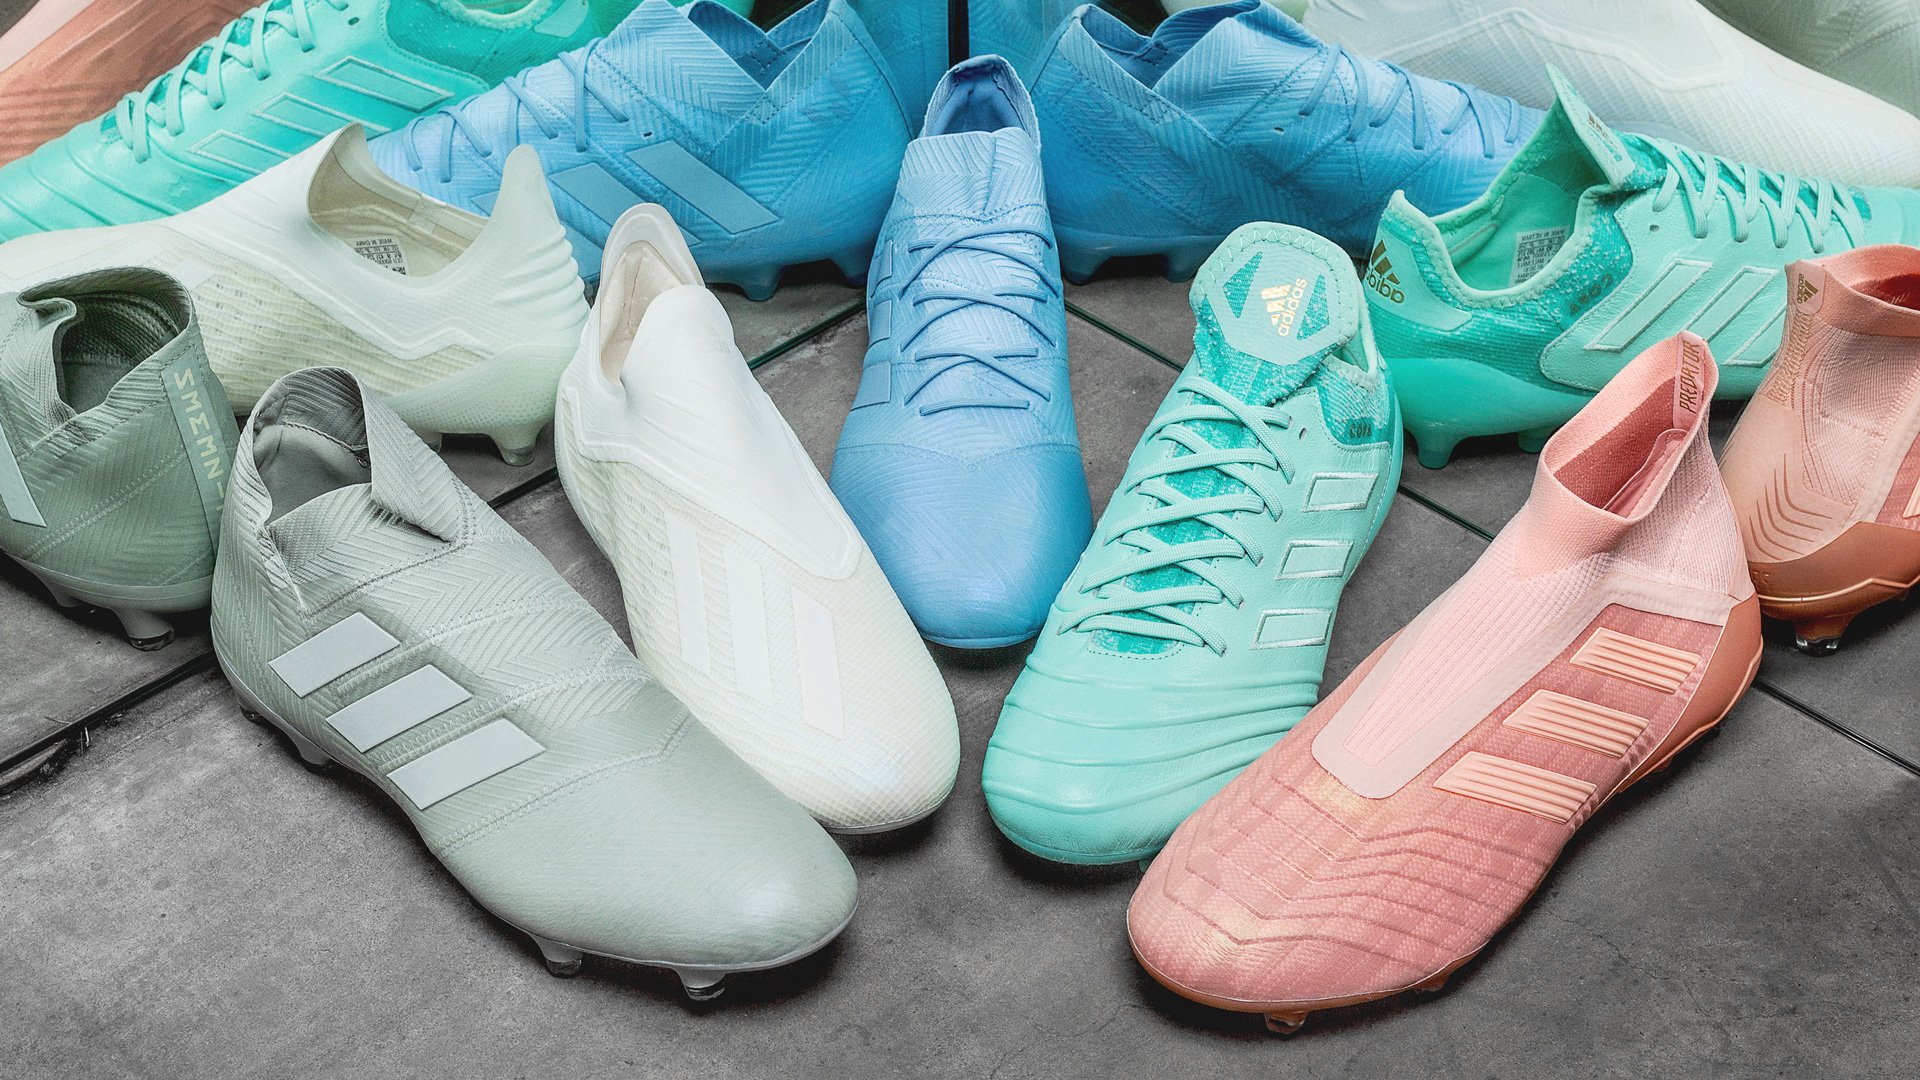 adidas presents Spectral Mode Pack 